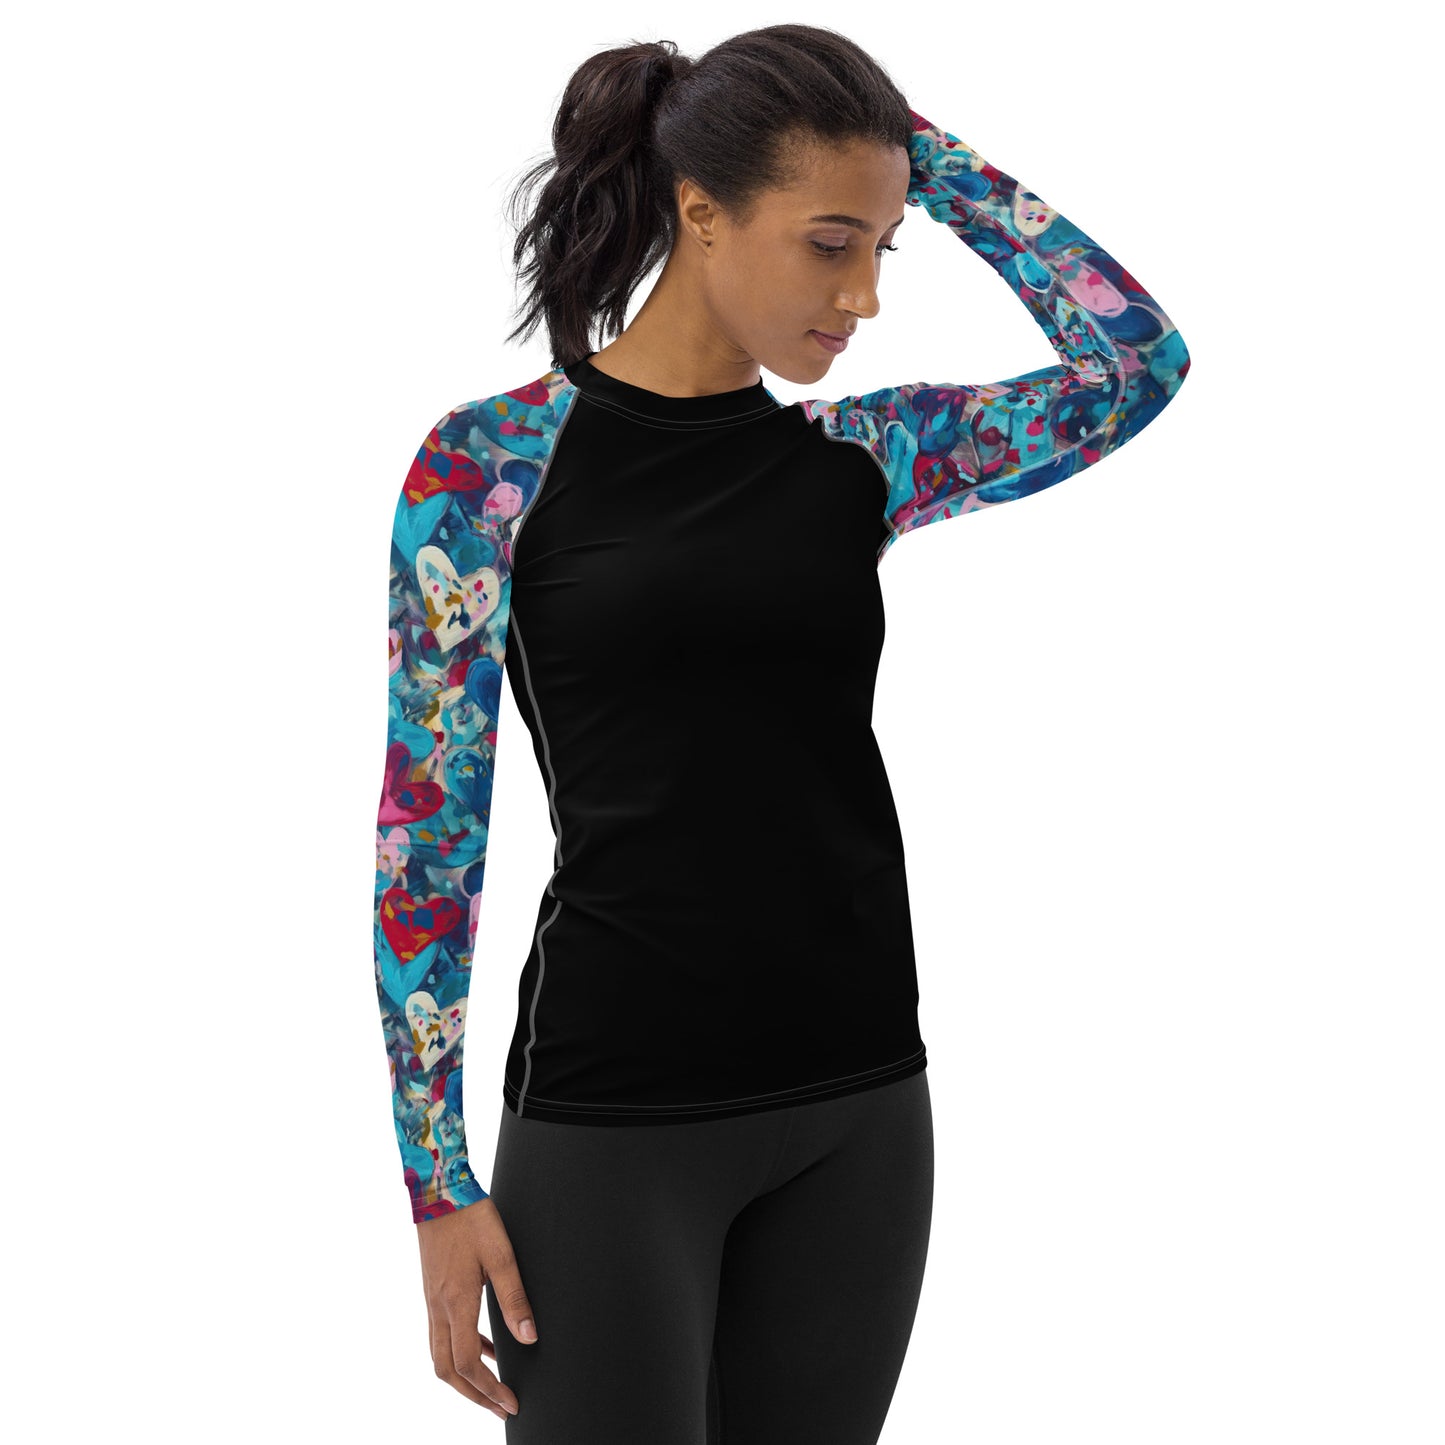 Blue Painted Hearts Sleeves and Black Body - Women's Rash Guard